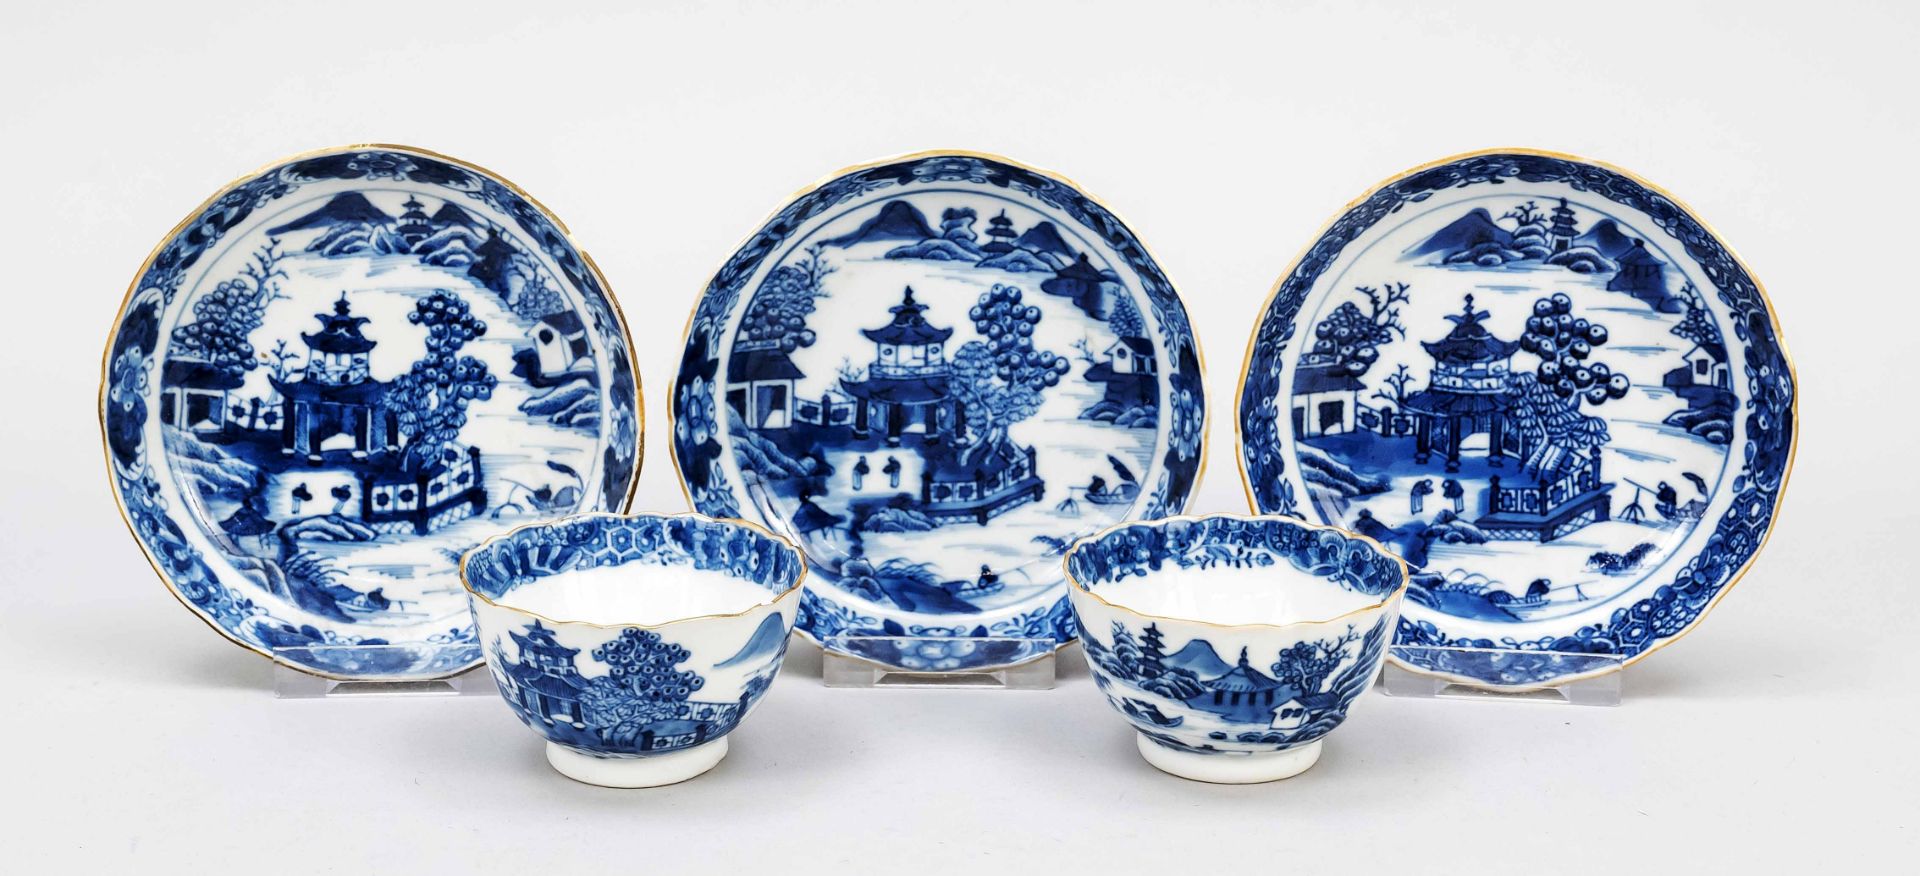 Quintet Yantai, China, Qing dynasty(1644-1911), 18th century, 3 porcelain small plates and 2 -cups